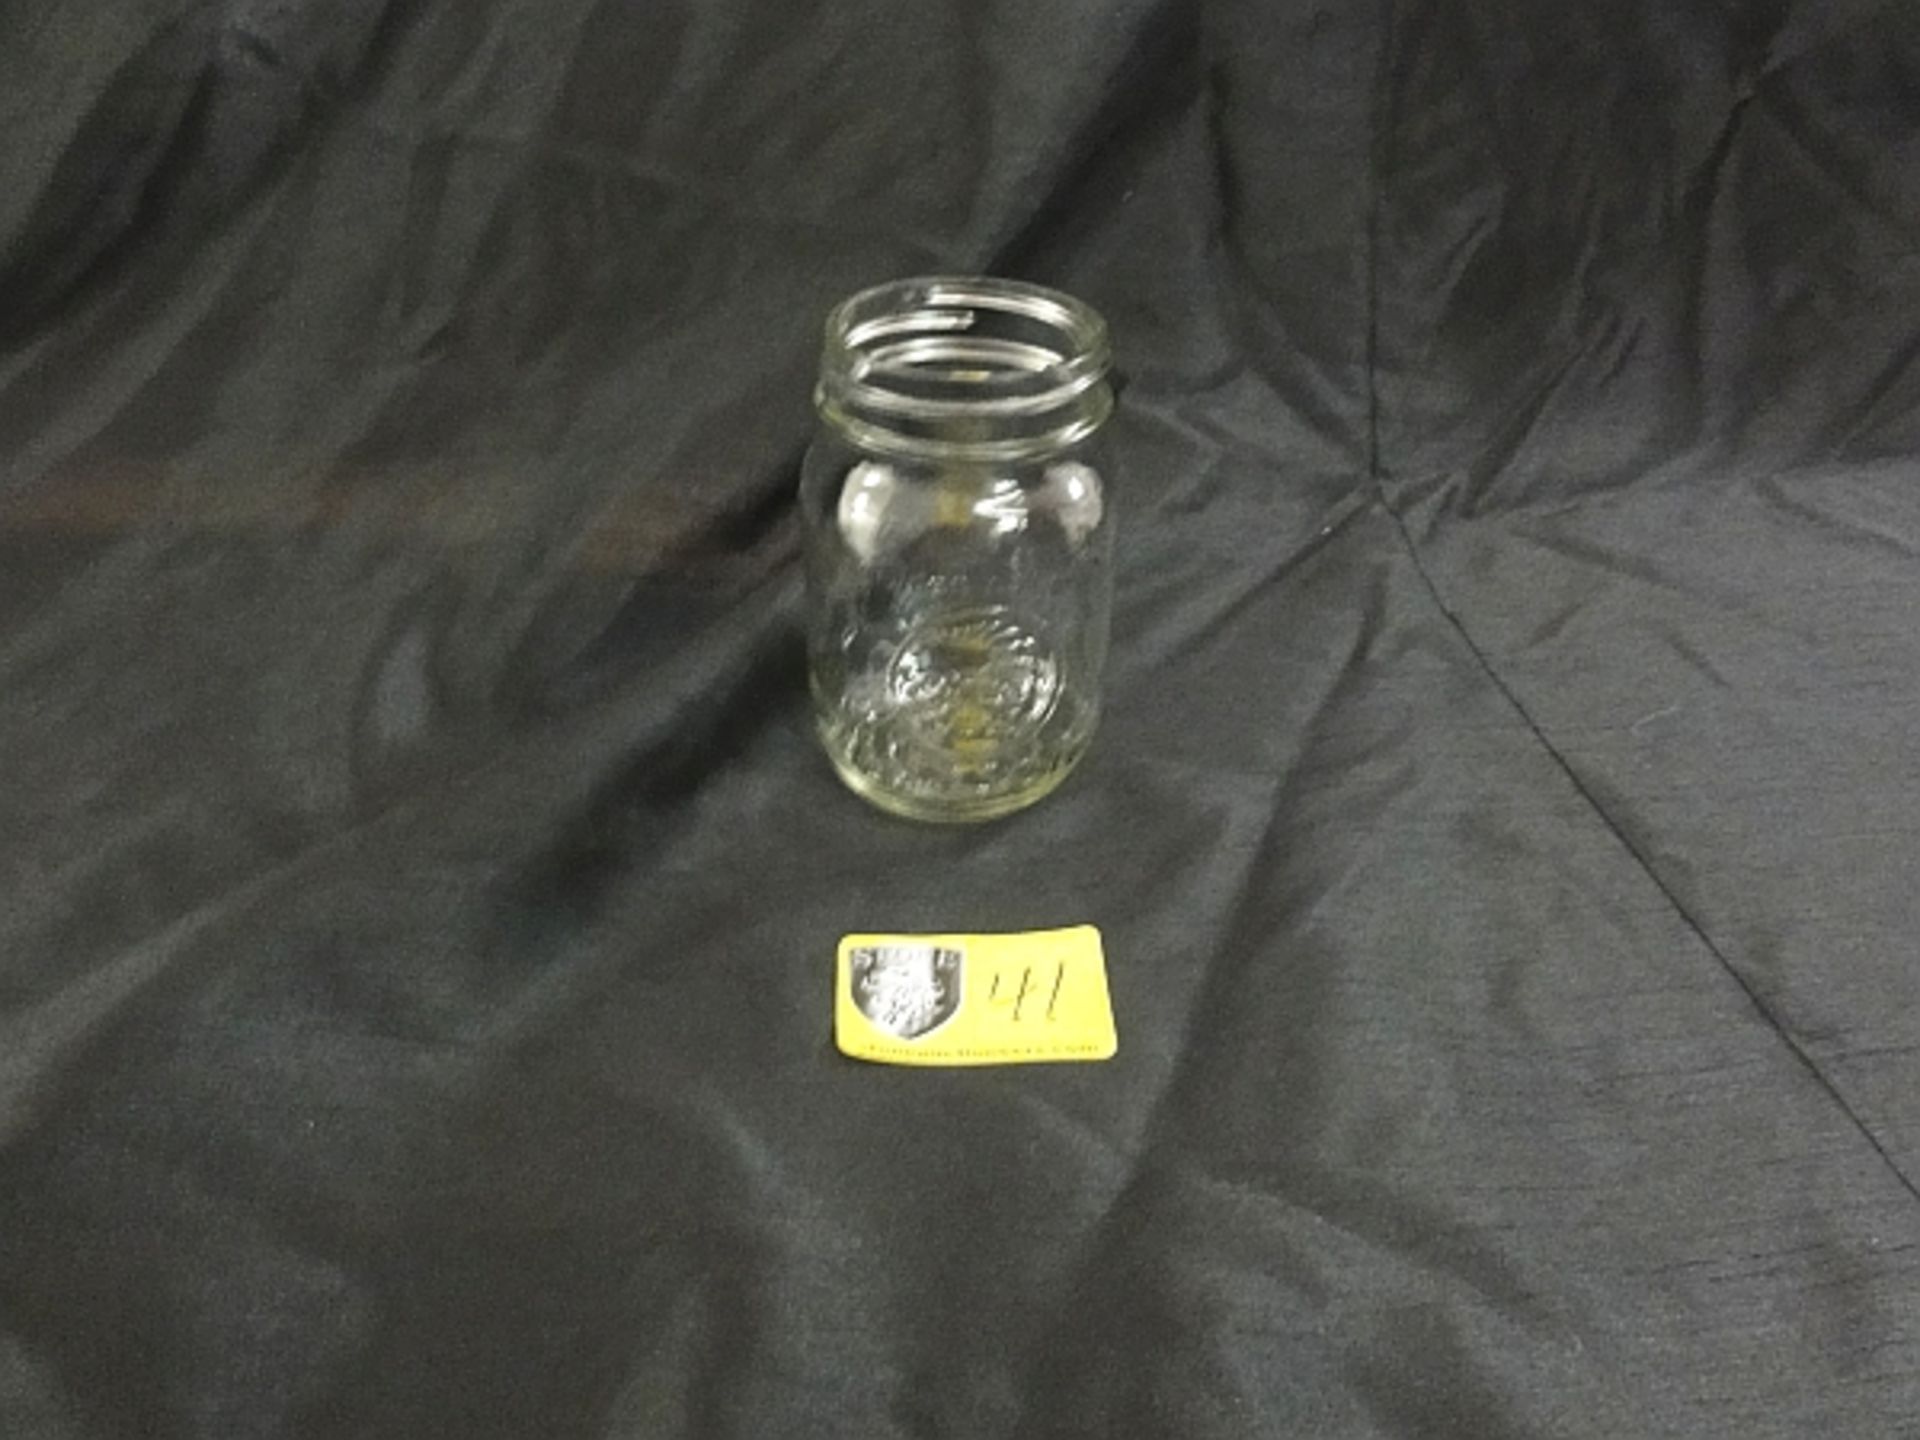 LOT OF 254 MASON JARS- LOT COMES IN 10 CRATES BILLED @ $15 EA